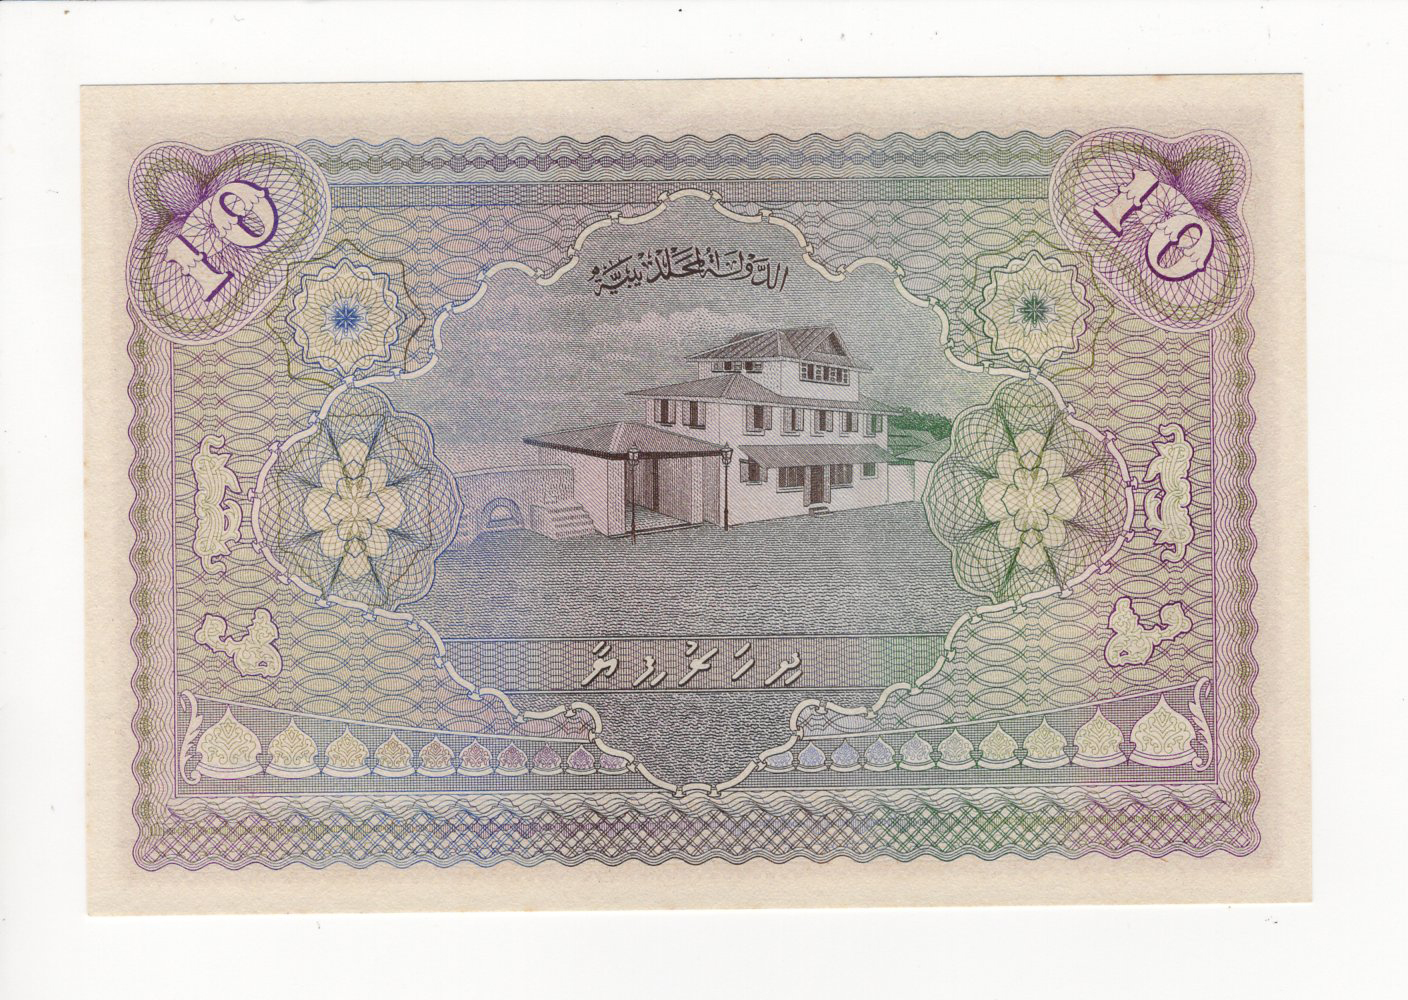 Maldives 10 Rupees dated 1947, serial A241 044 (TBB B105a, Pick5a) light toning, Uncirculated - Image 2 of 2